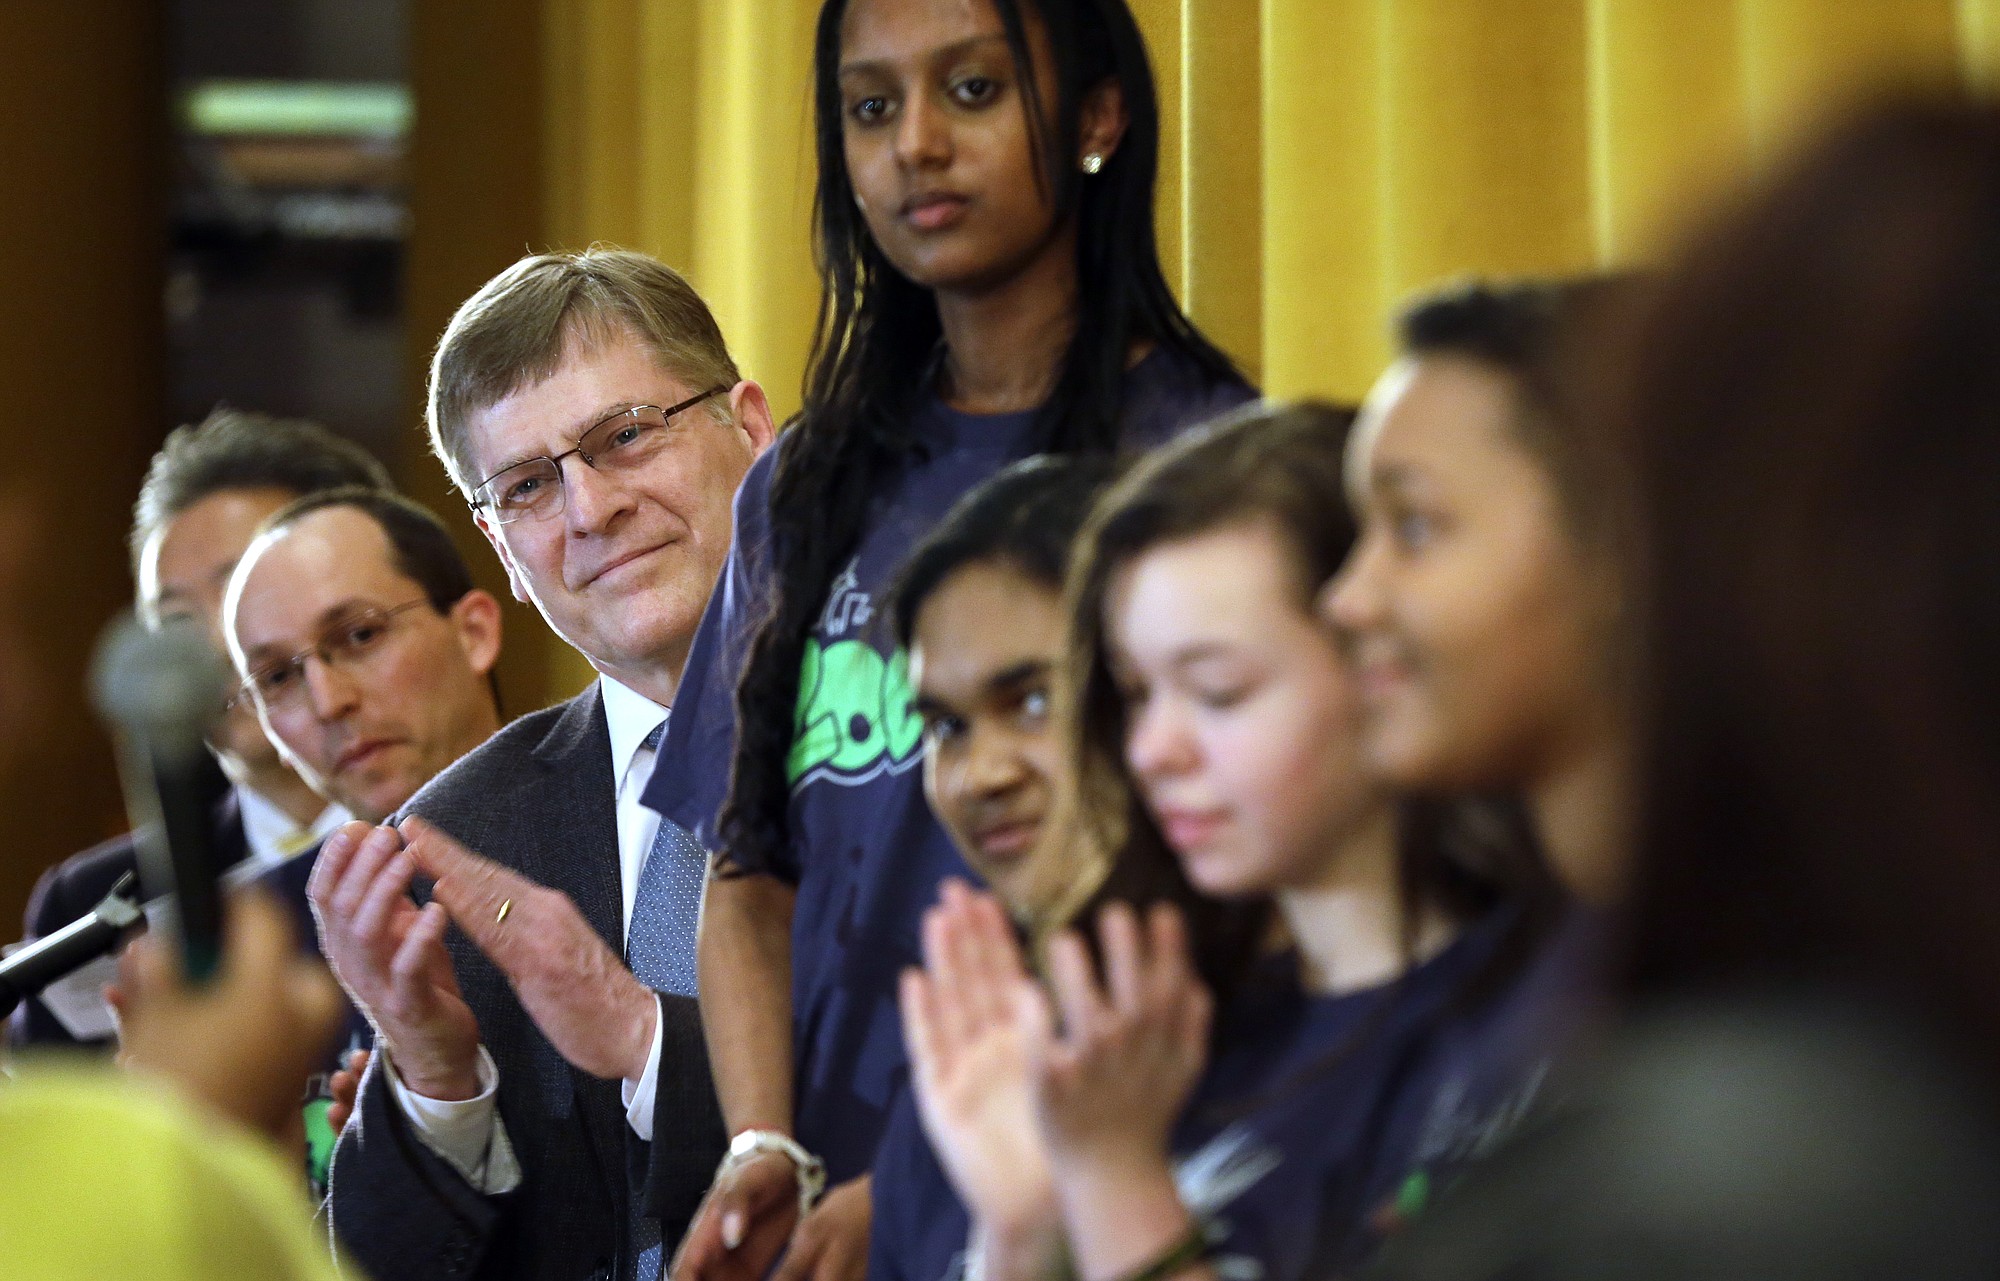 Seattle City Attorney Pete Holmes, center left, applauds at a presentation of a new effort to prevent the use of marijuana and other drugs by teens Wednesday in Seattle.